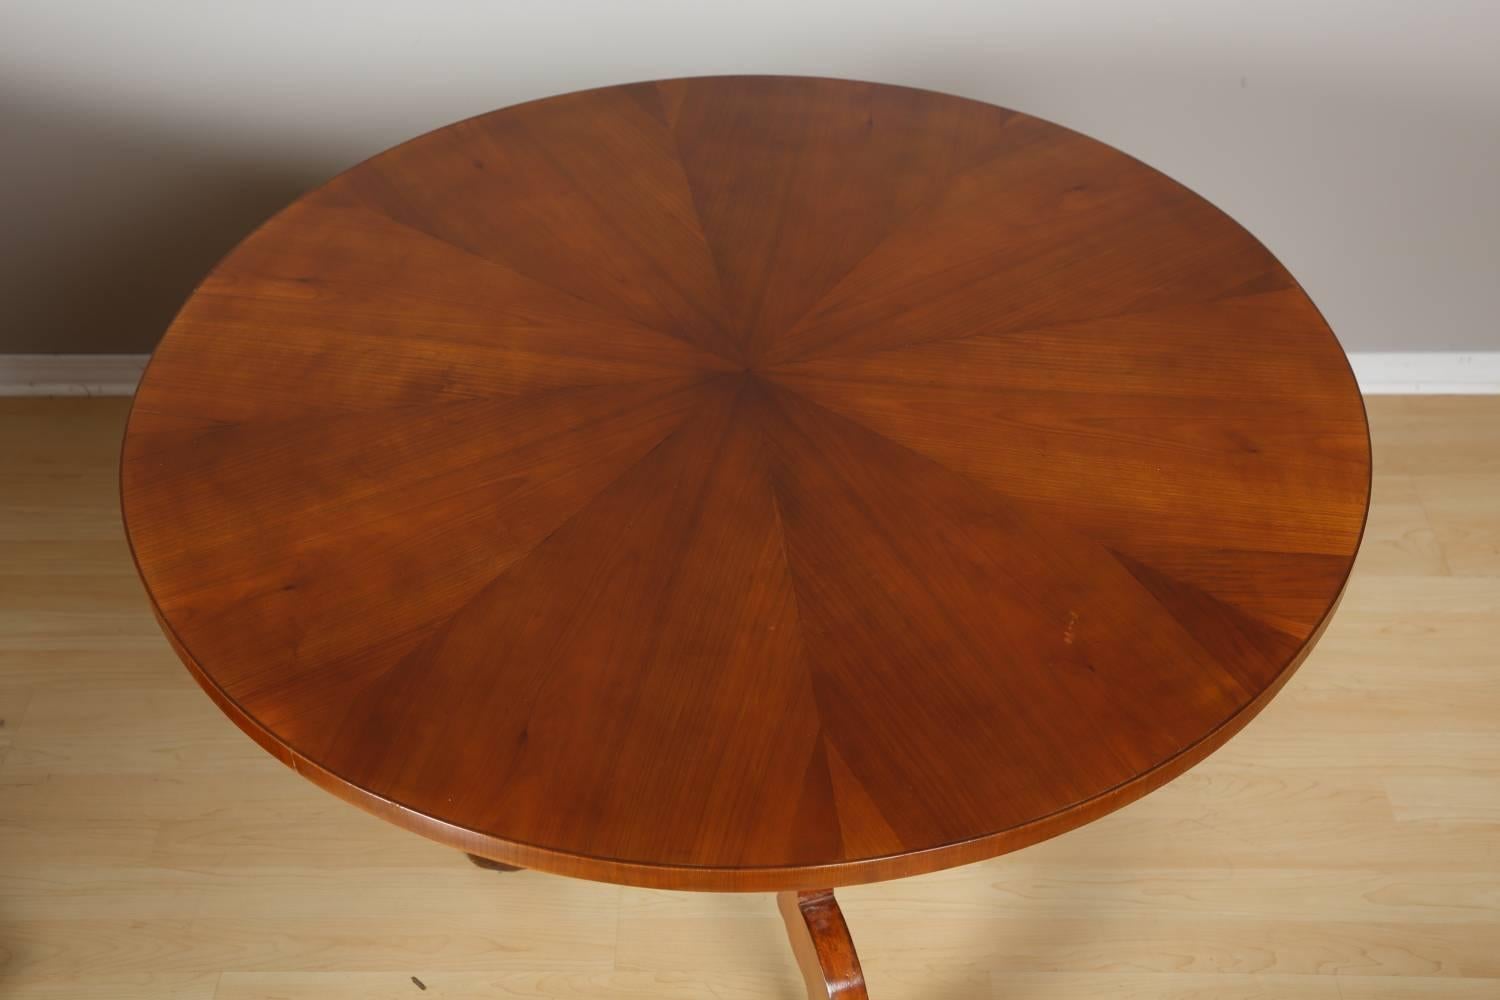 Biedermeier round table, circa 1850. Elegant round Biedermeier table in cherry wood. The table has been restored with respect for original color and patina, and hand polished with natural shellac.